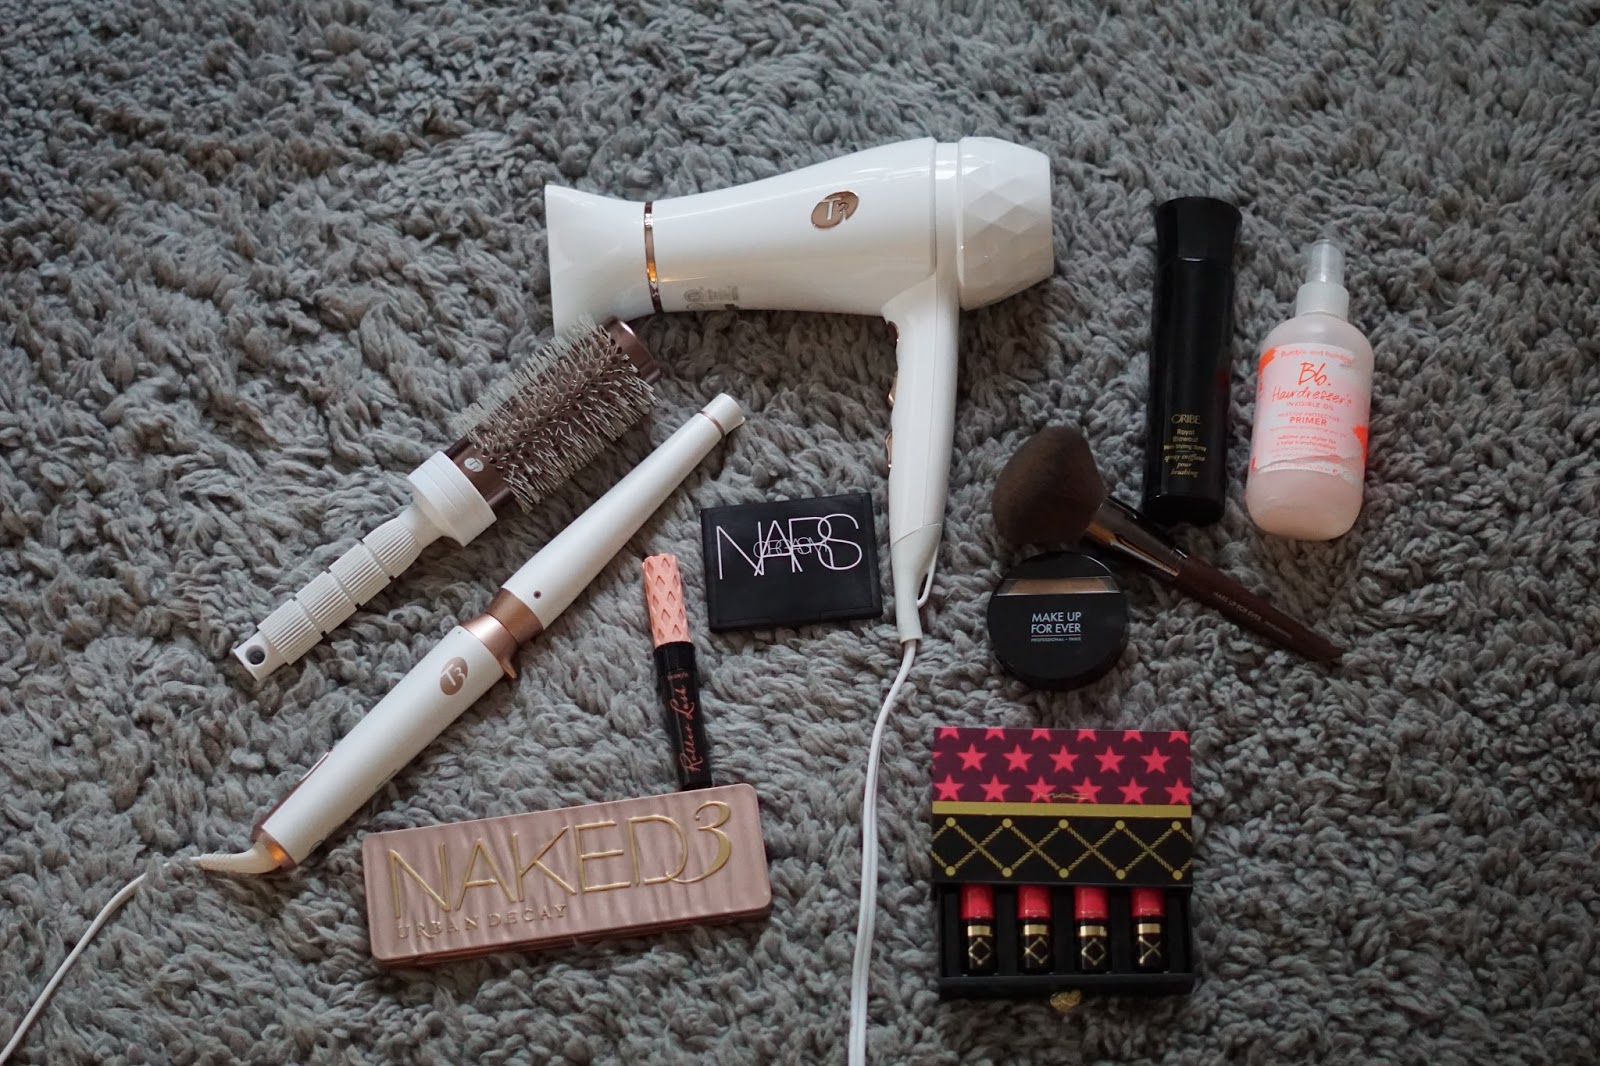 My Favorite Beauty Products